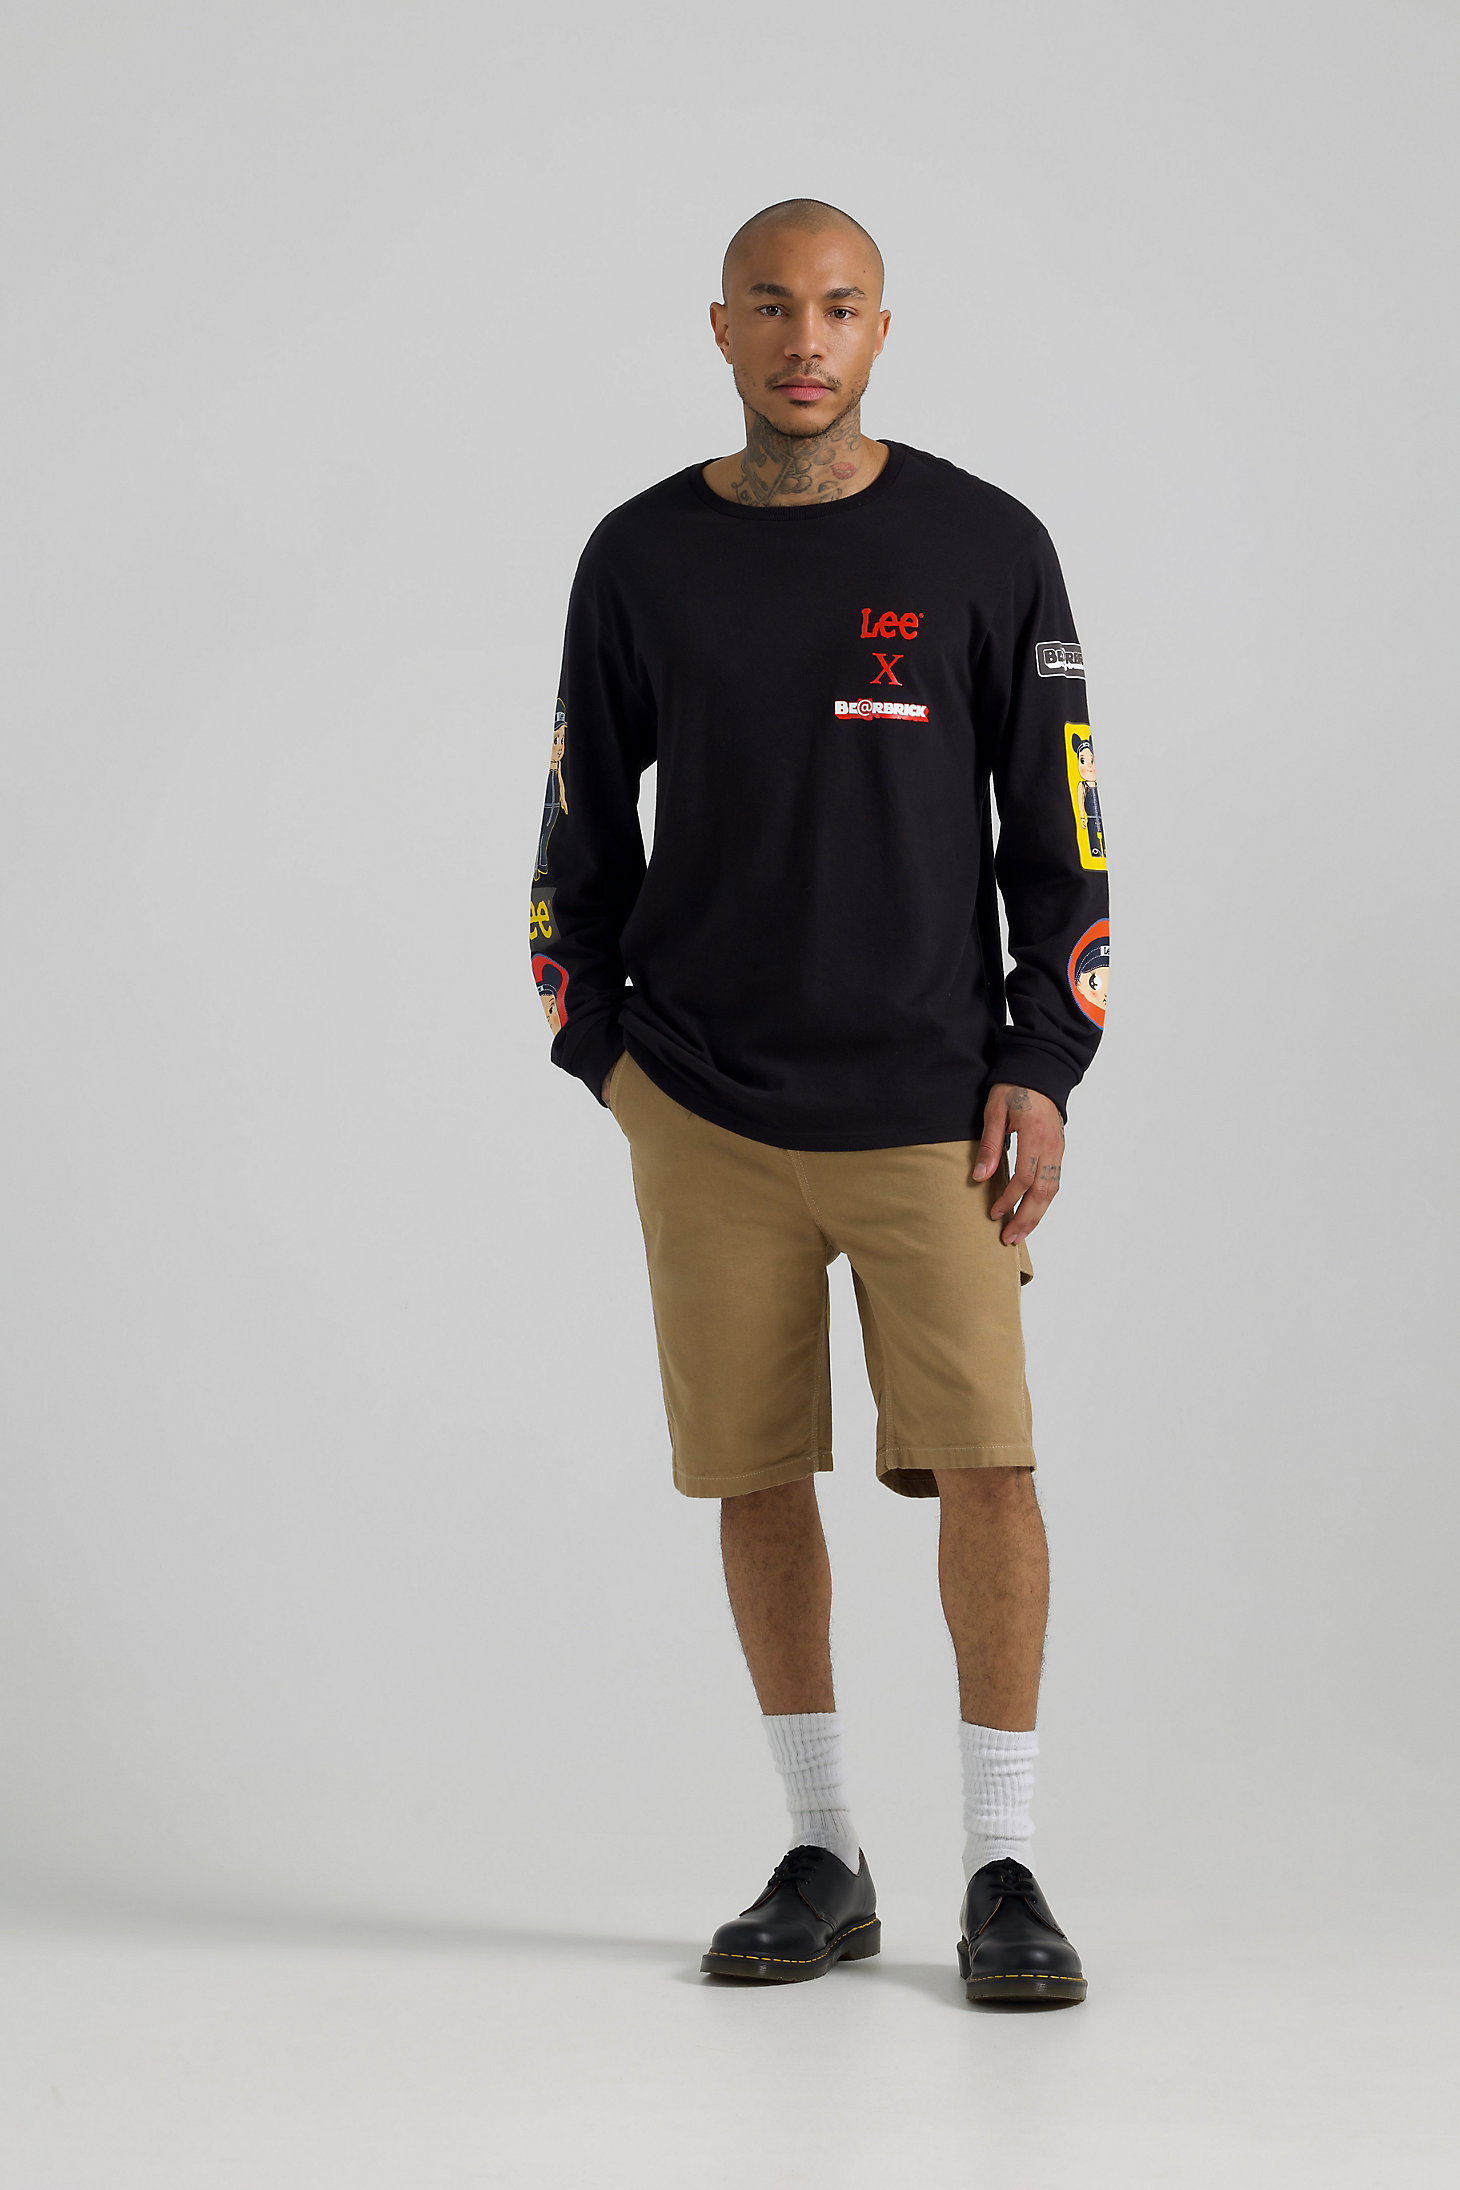 Men’s Lee x BE@RBRICK Relaxed Fit Long Sleeve Tee in Washed Black alternative view 1